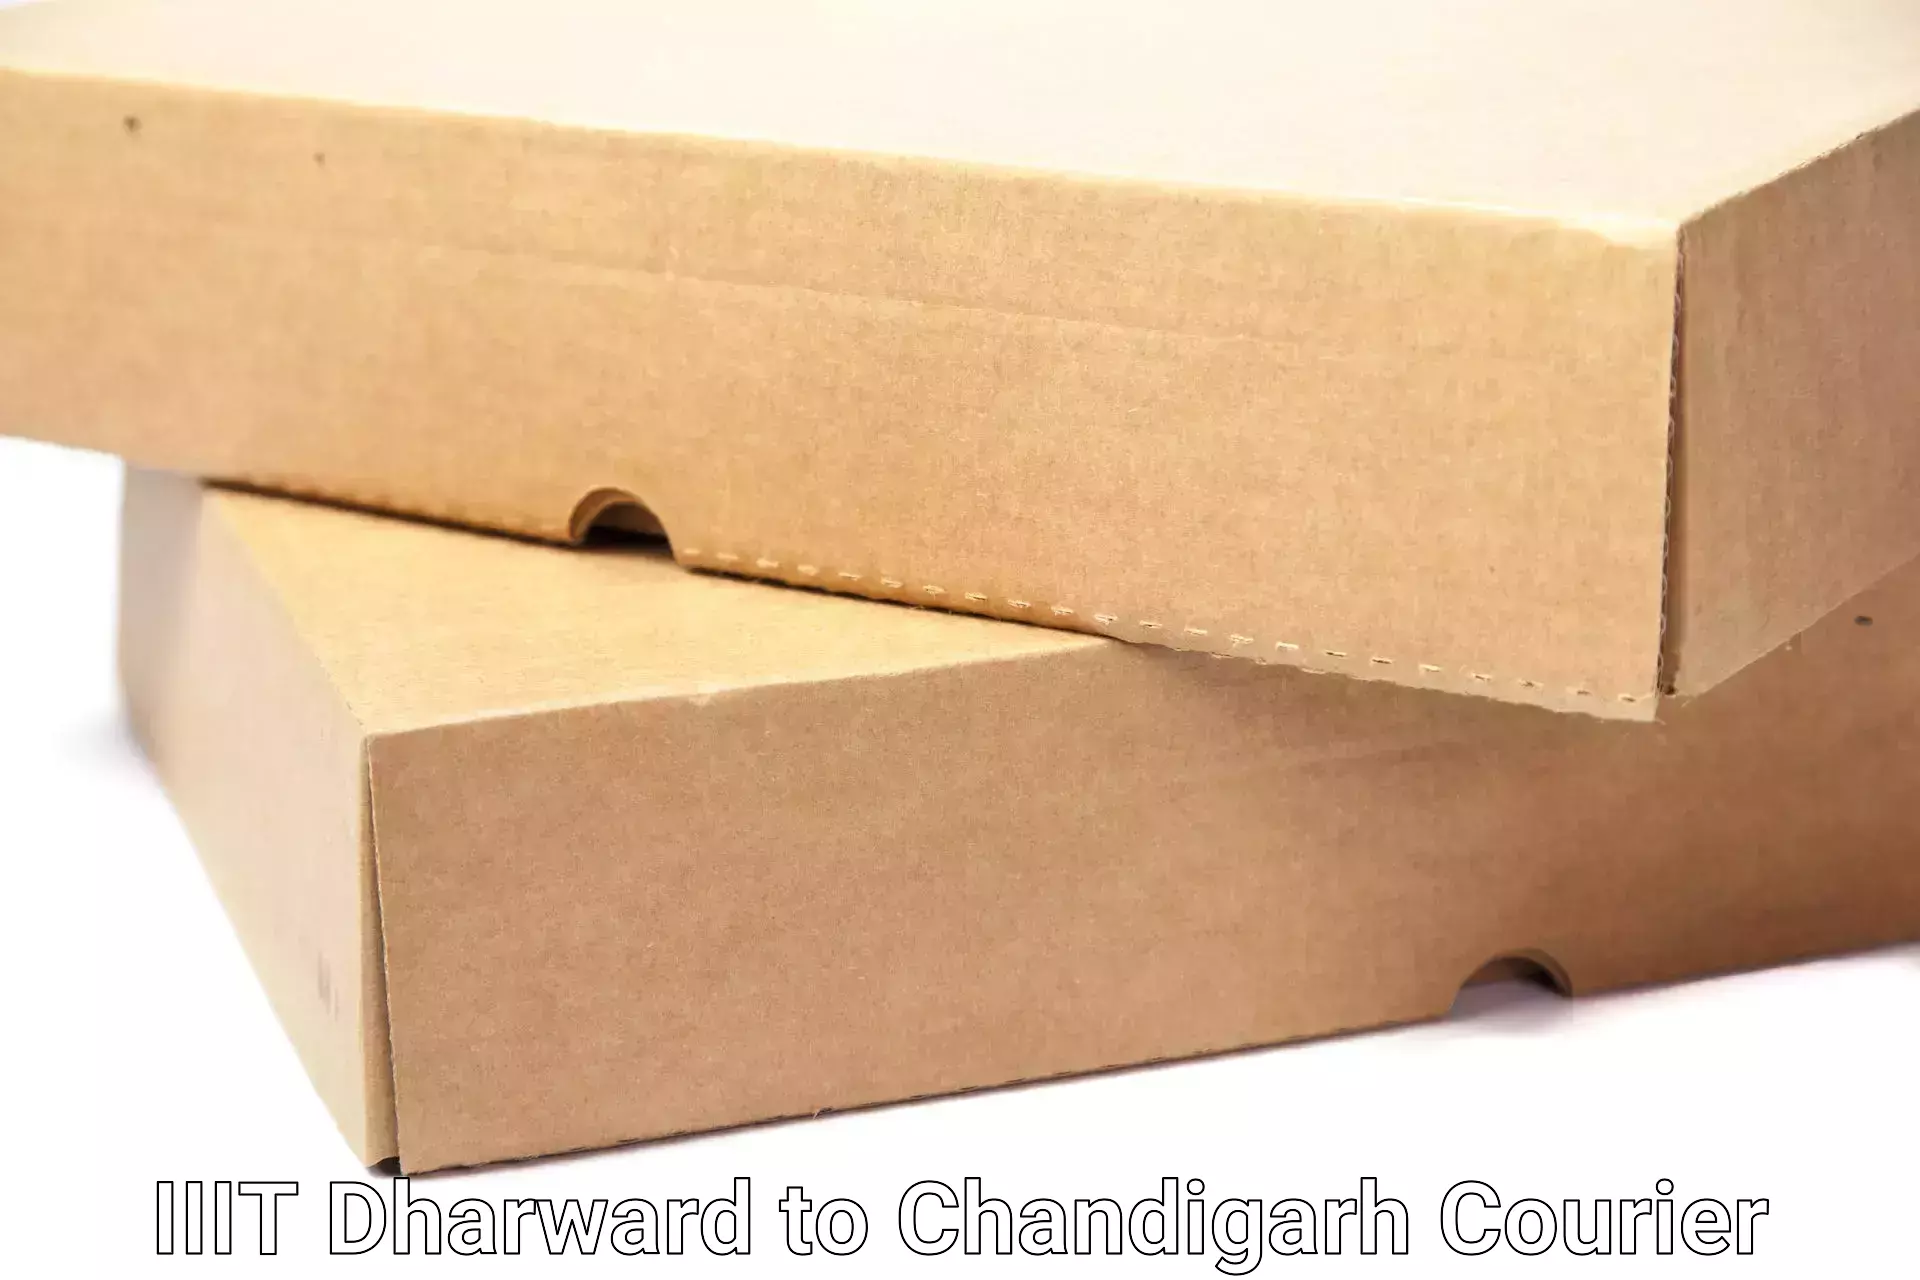 Quality relocation assistance IIIT Dharward to Chandigarh